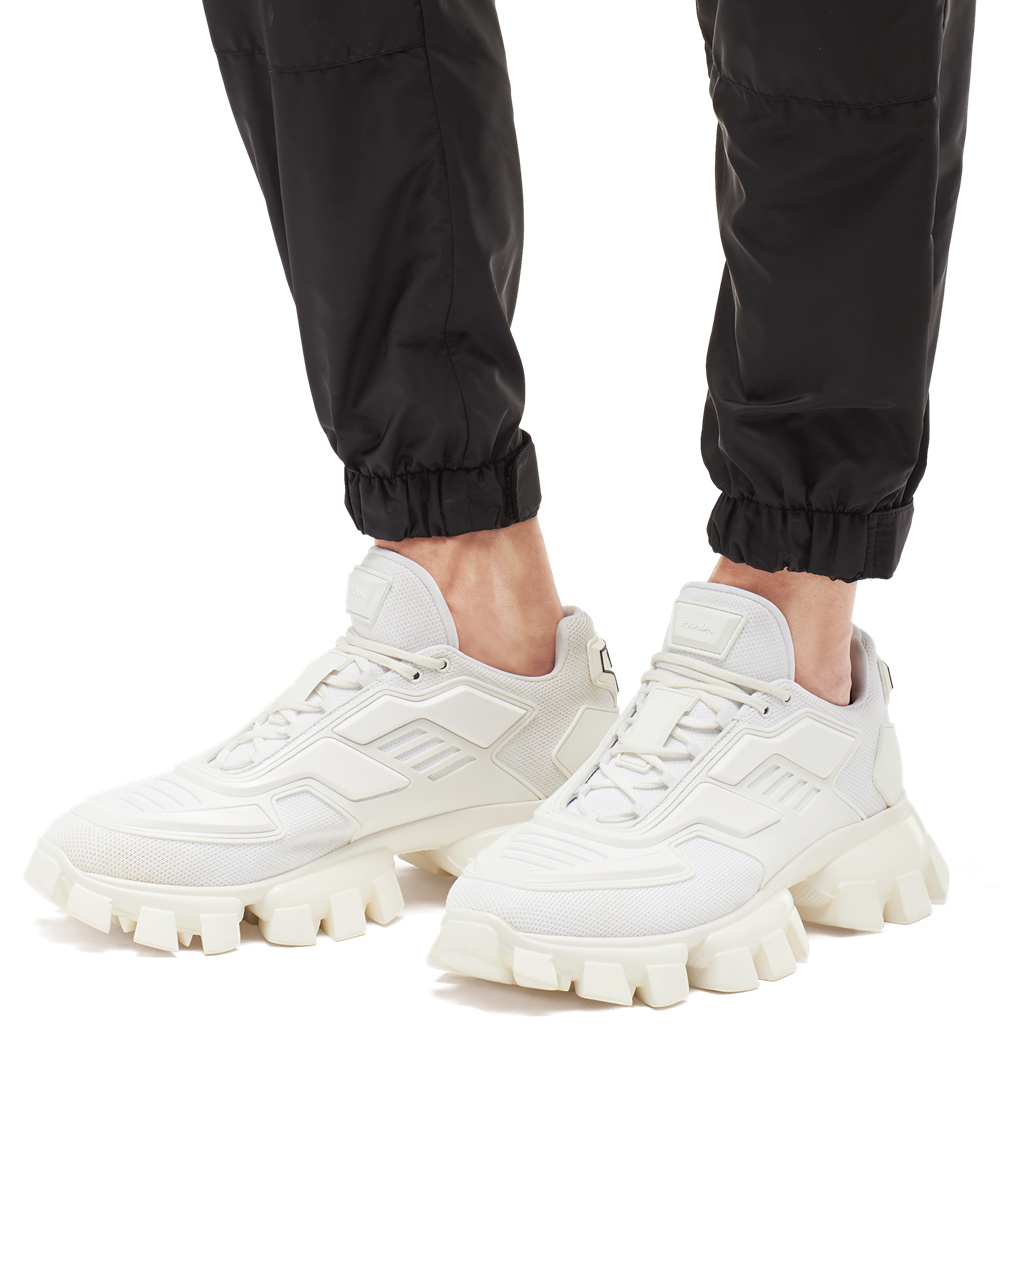 Prada Sneakers Shop South Africa - Cloudbust Thunder Technical Fabric  Sneakers Mens White